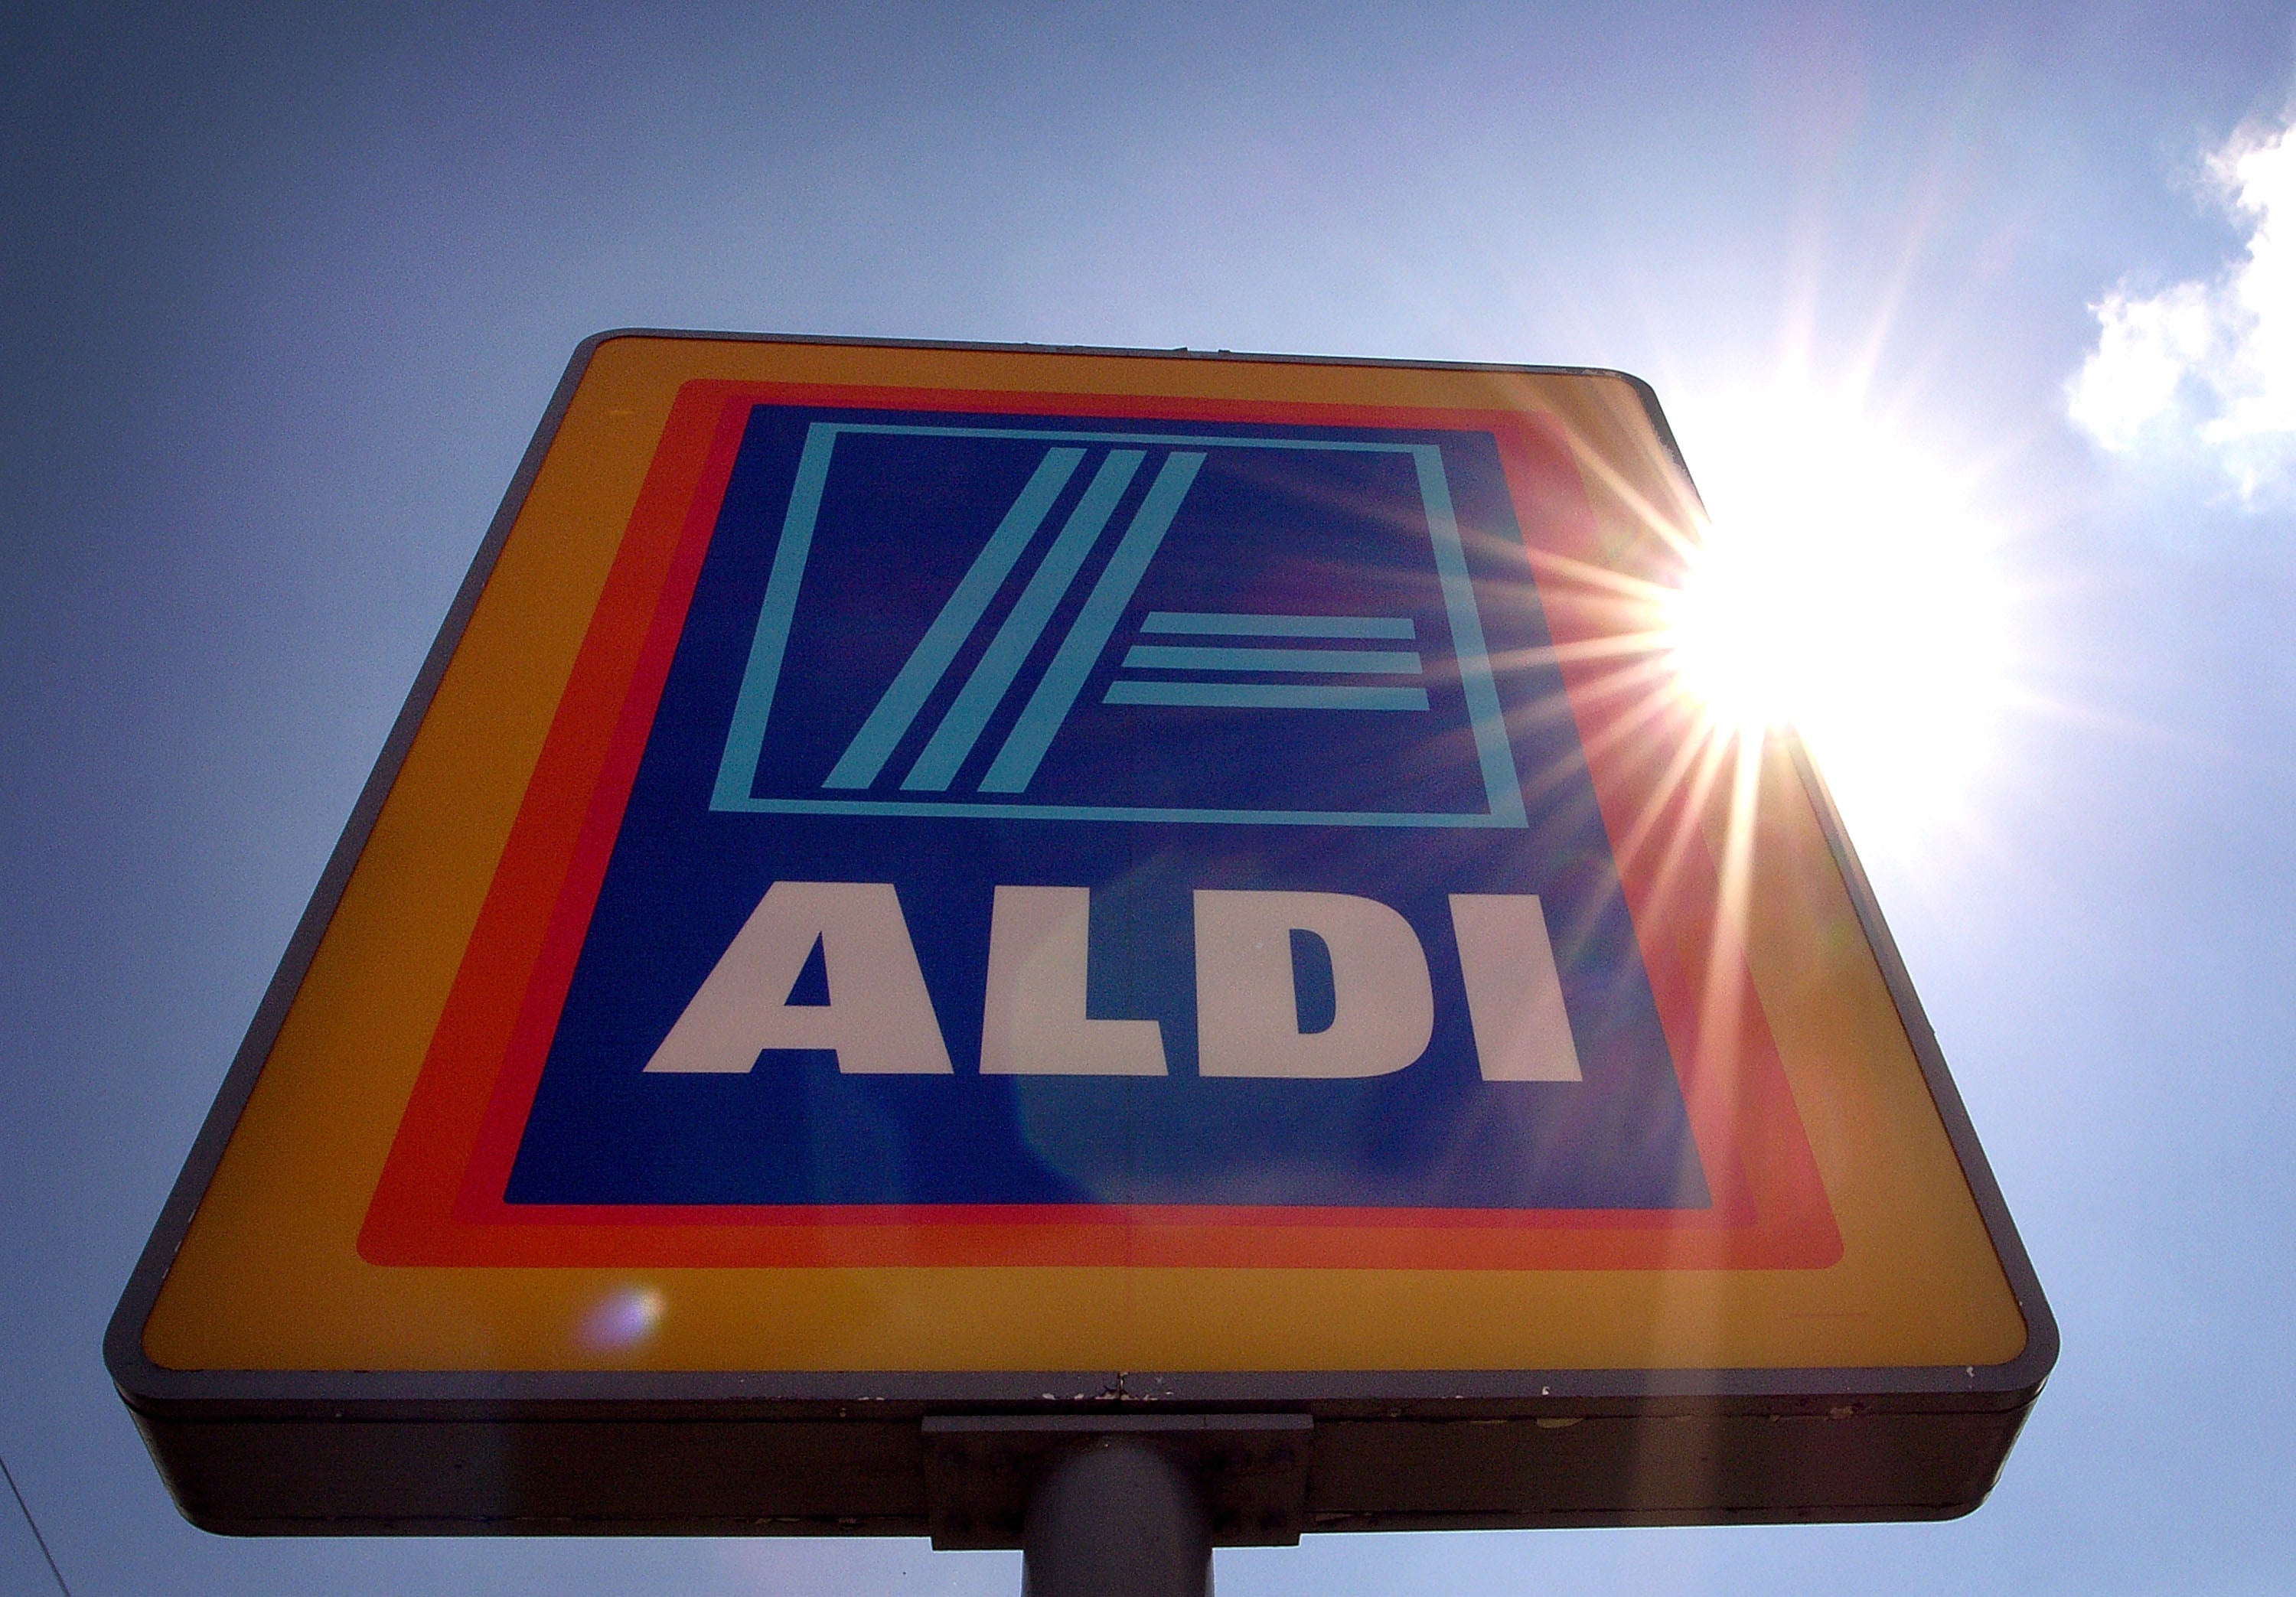 Aldi says every new store creates an average of 30 jobs